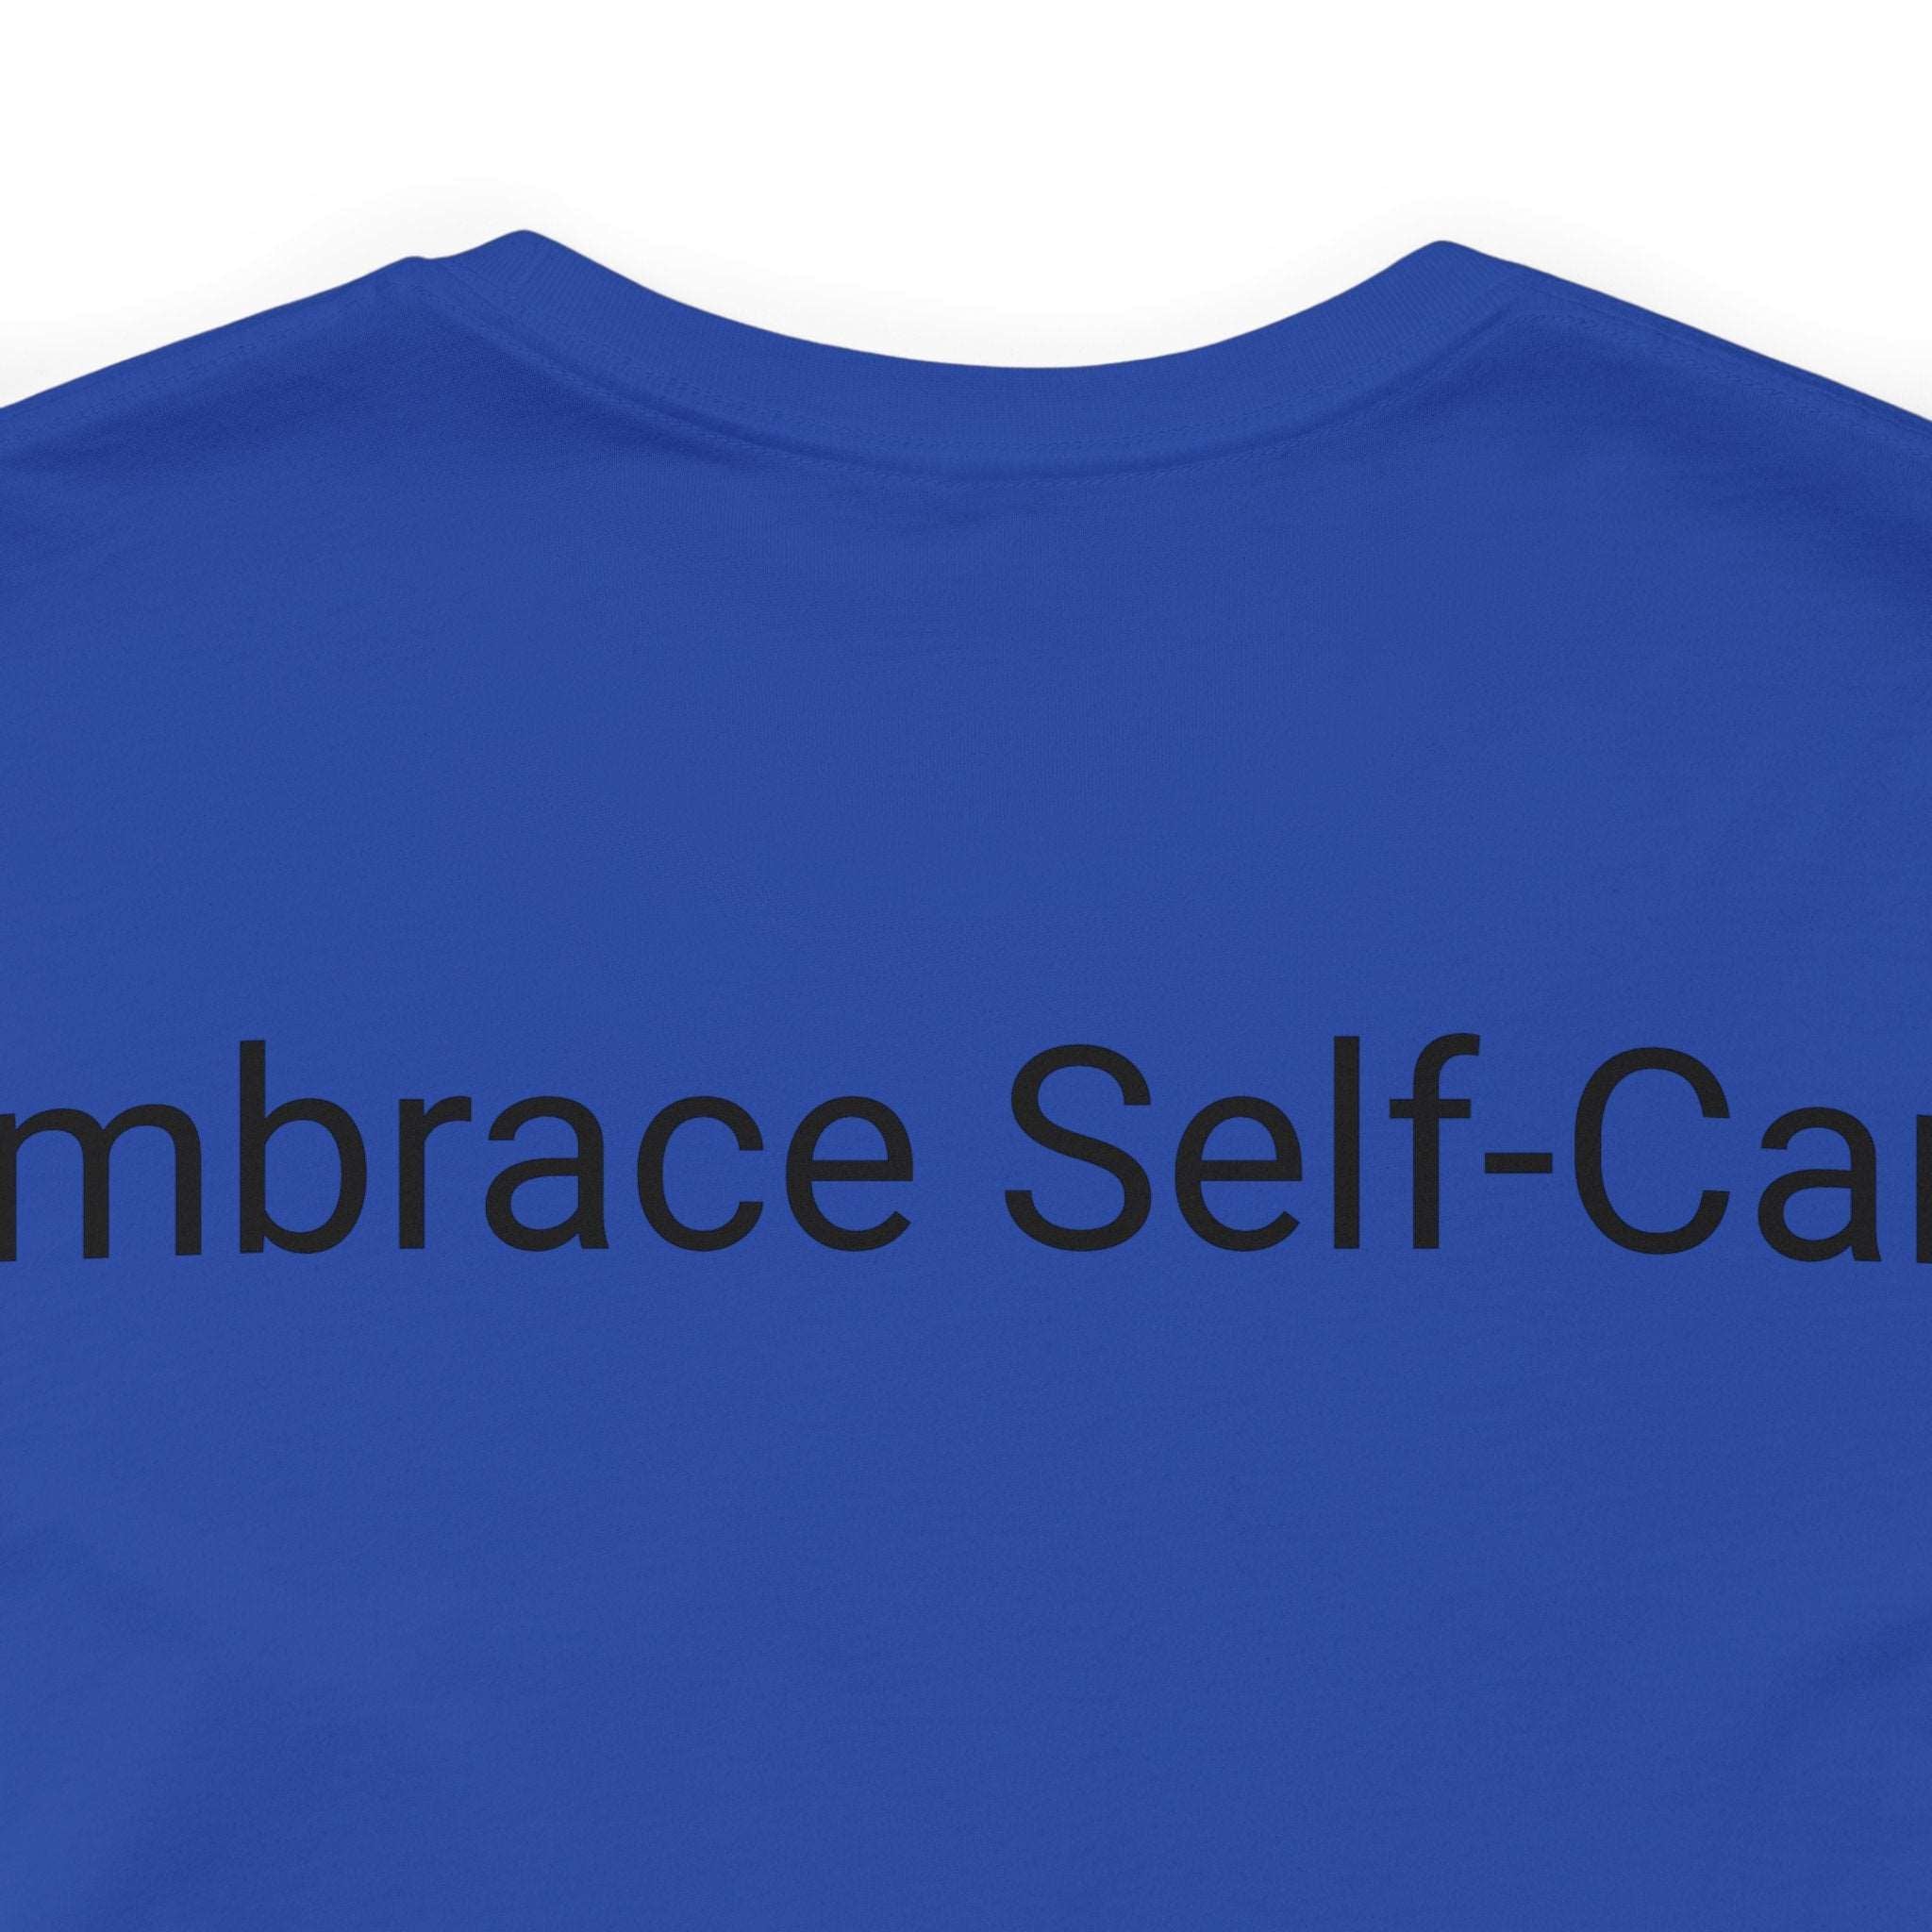 Embrace Self-Care Jersey Tee - Bella+Canvas 3001 Heather Mauve Airlume Cotton Bella+Canvas 3001 Crew Neckline Jersey Short Sleeve Lightweight Fabric Mental Health Support Retail Fit Tear-away Label Tee Unisex Tee T-Shirt 3872710579415658564_2048_182b7d45-103a-4eb4-bf5e-901622445ea3 Printify